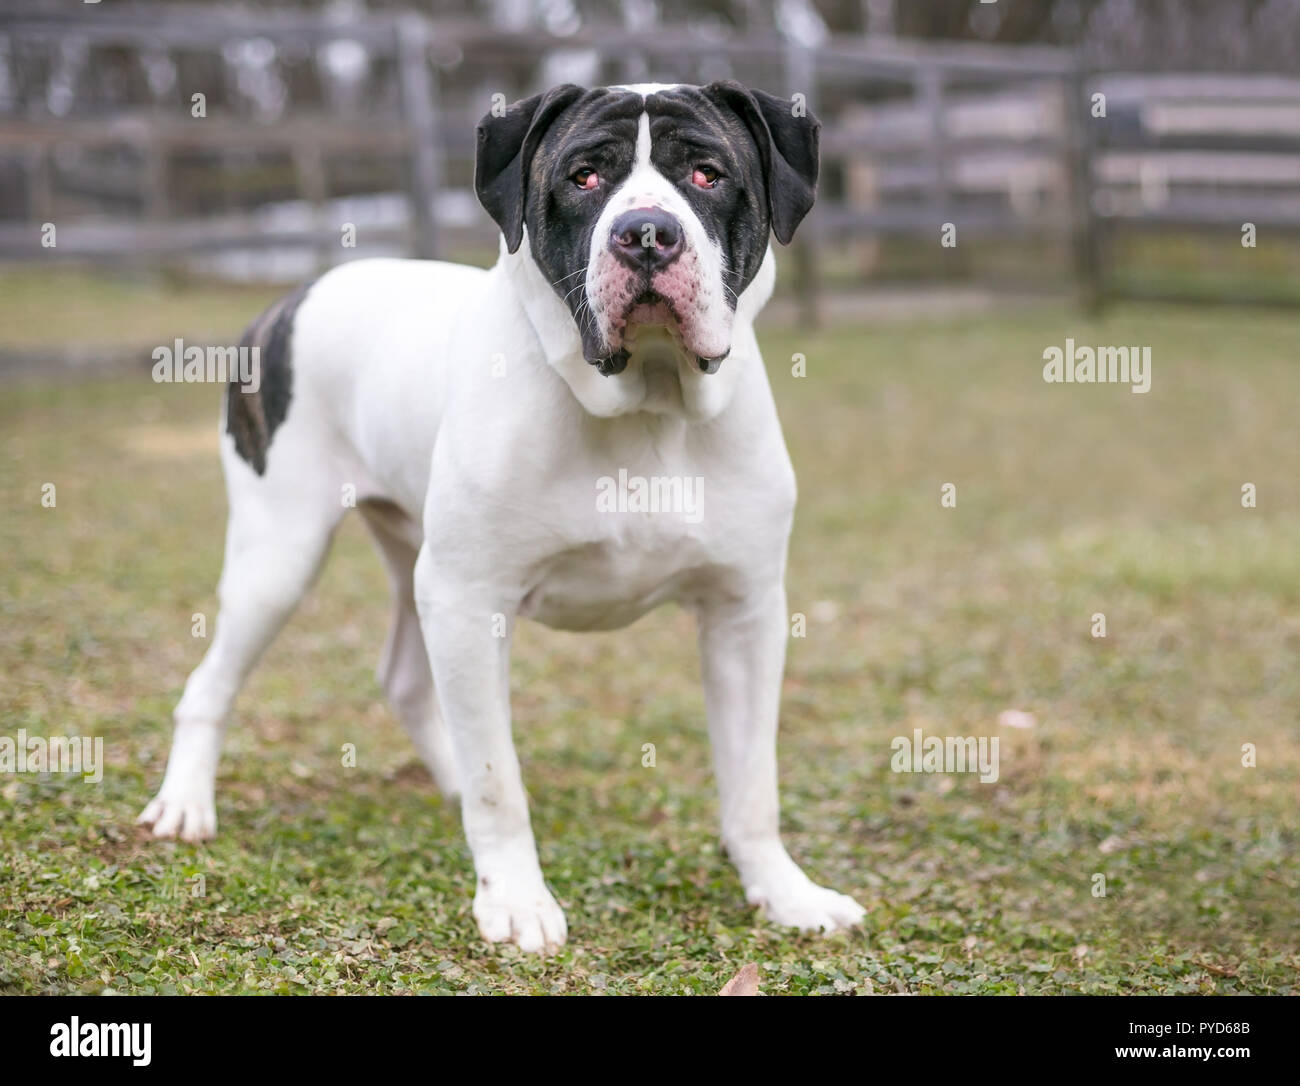 A Mastiff mixed breed dog with nictitans gland prolapse or 'cherry eye' in both eyes Stock Photo